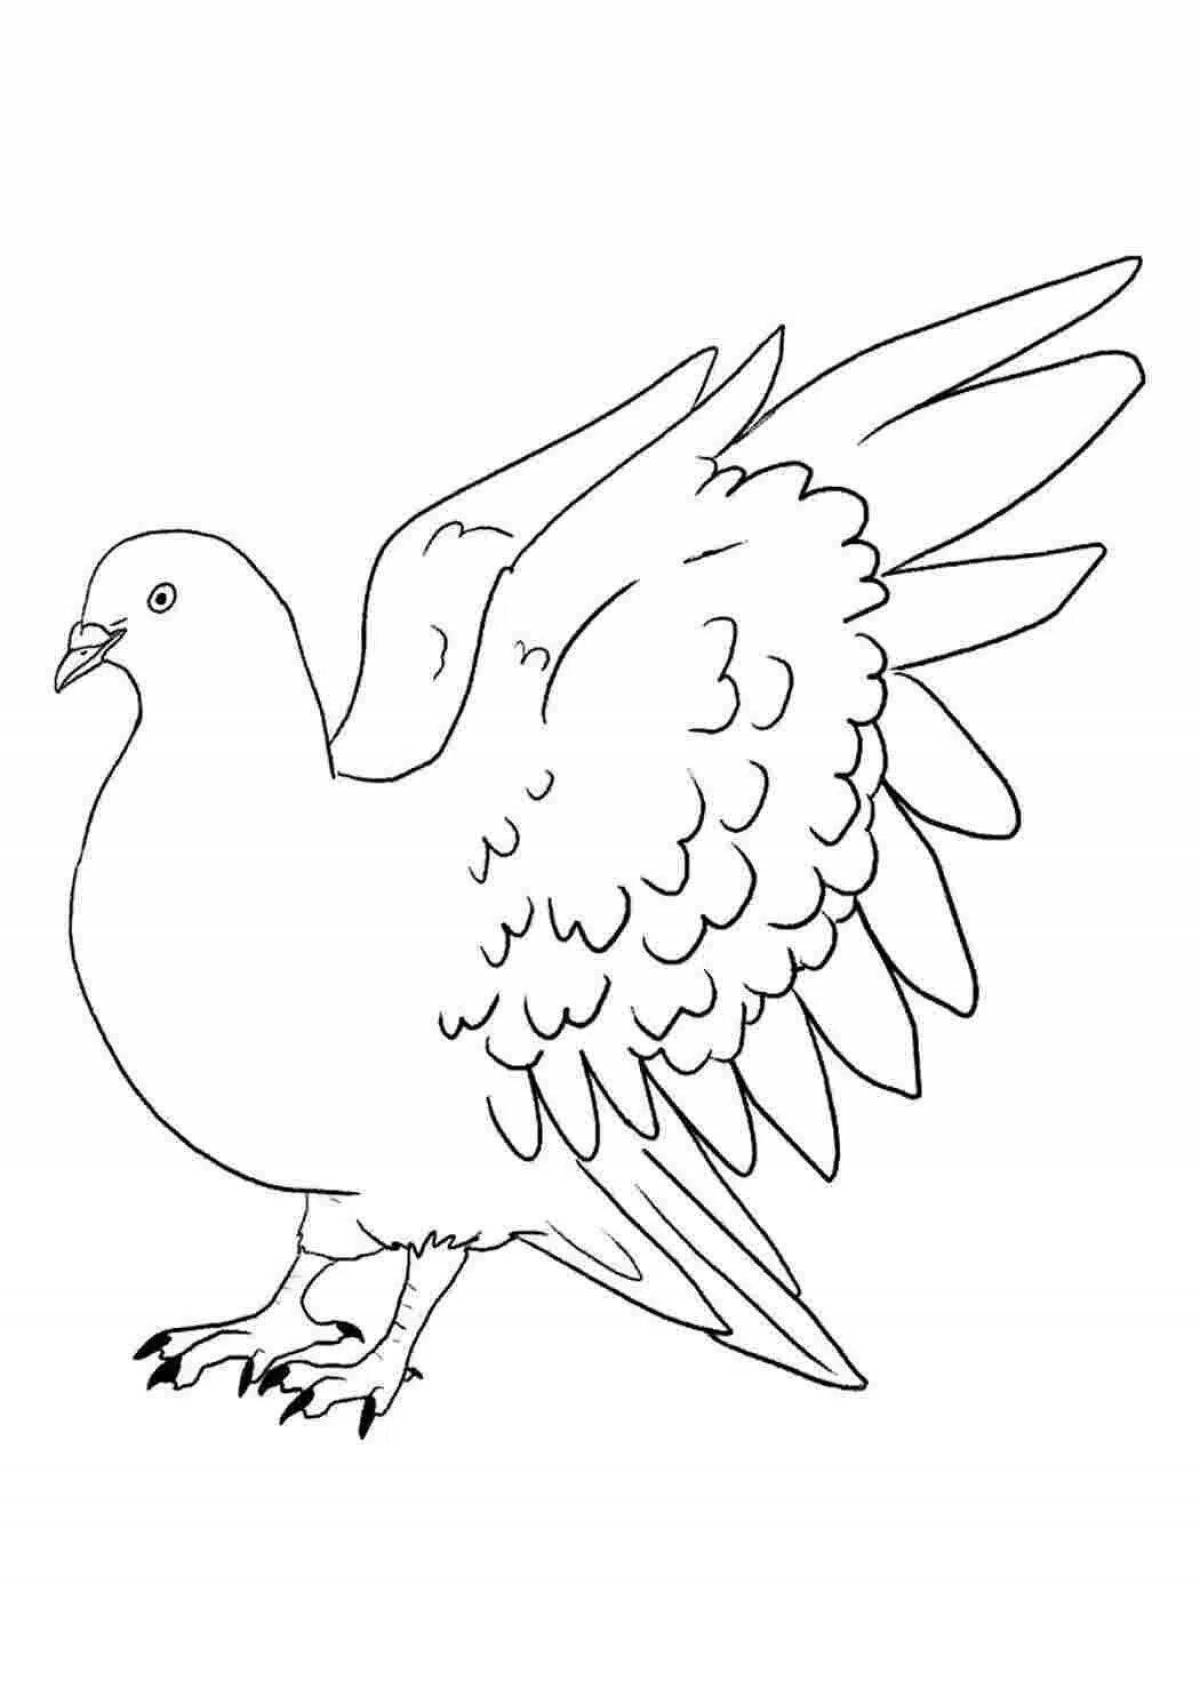 Exquisite white dove coloring page